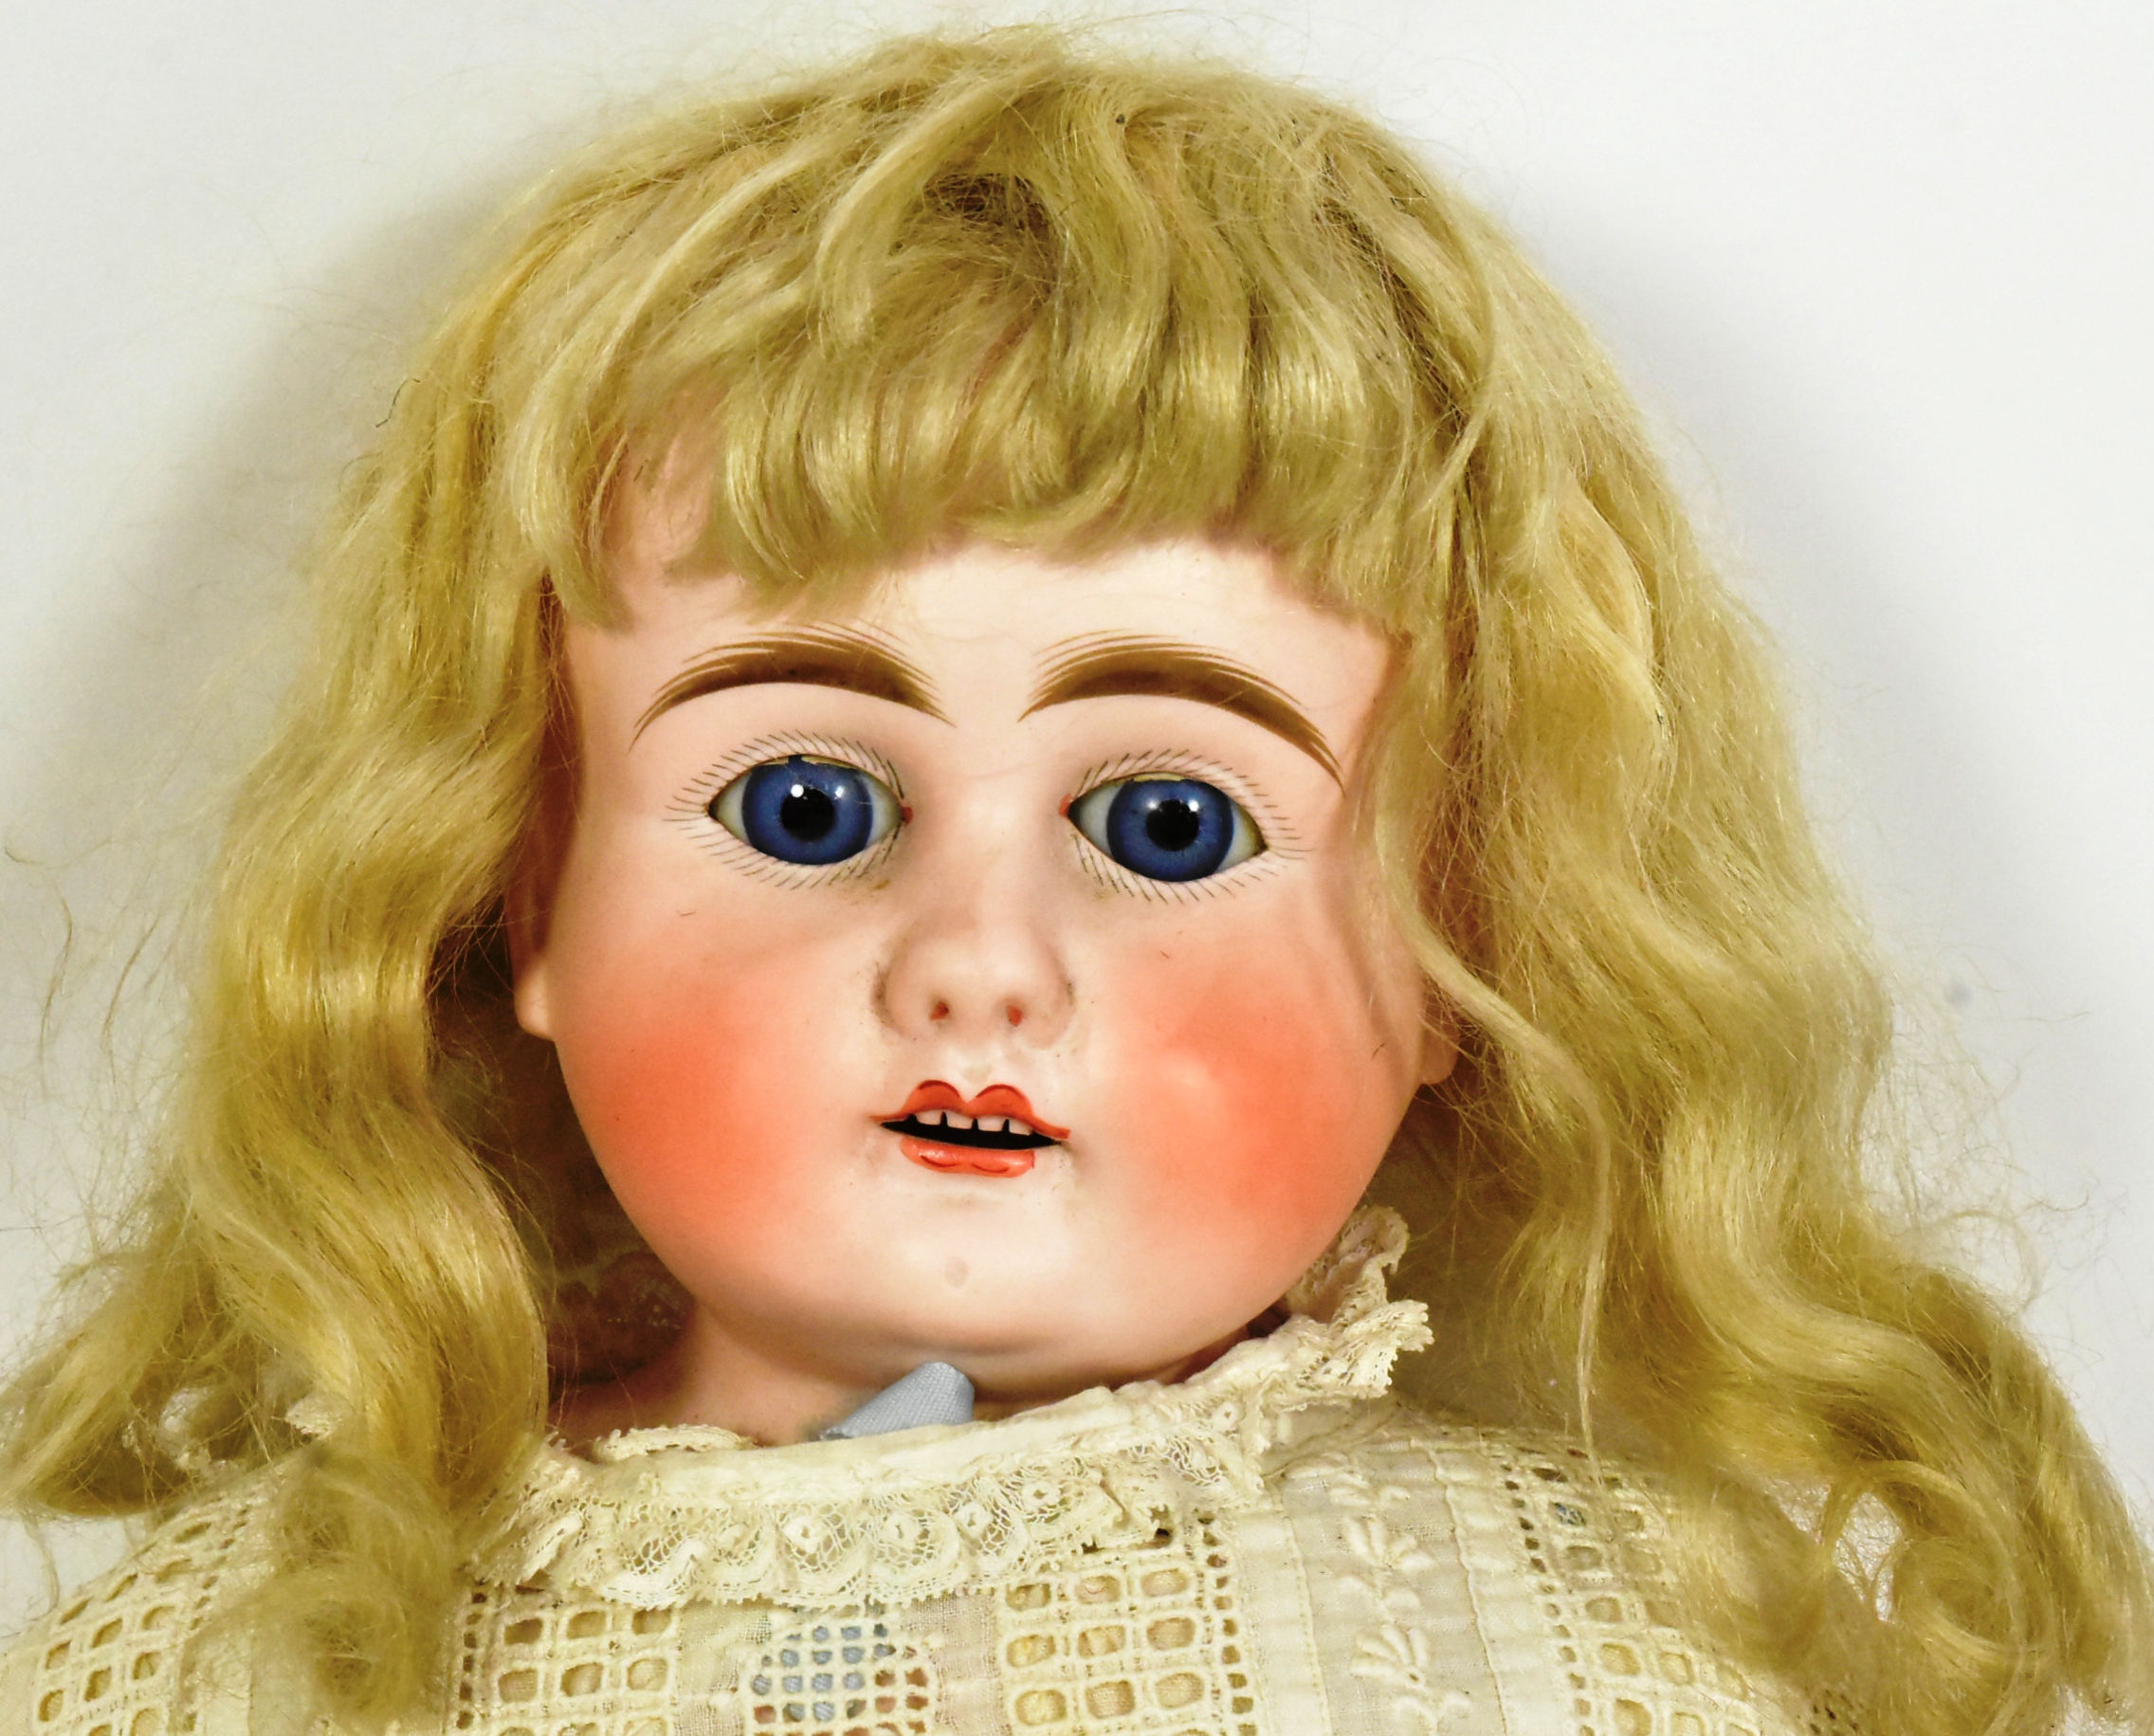 DOLL - 20TH CENTURY ANTIQUE STYLE PORCELAIN HEADED DOLL - Image 2 of 5